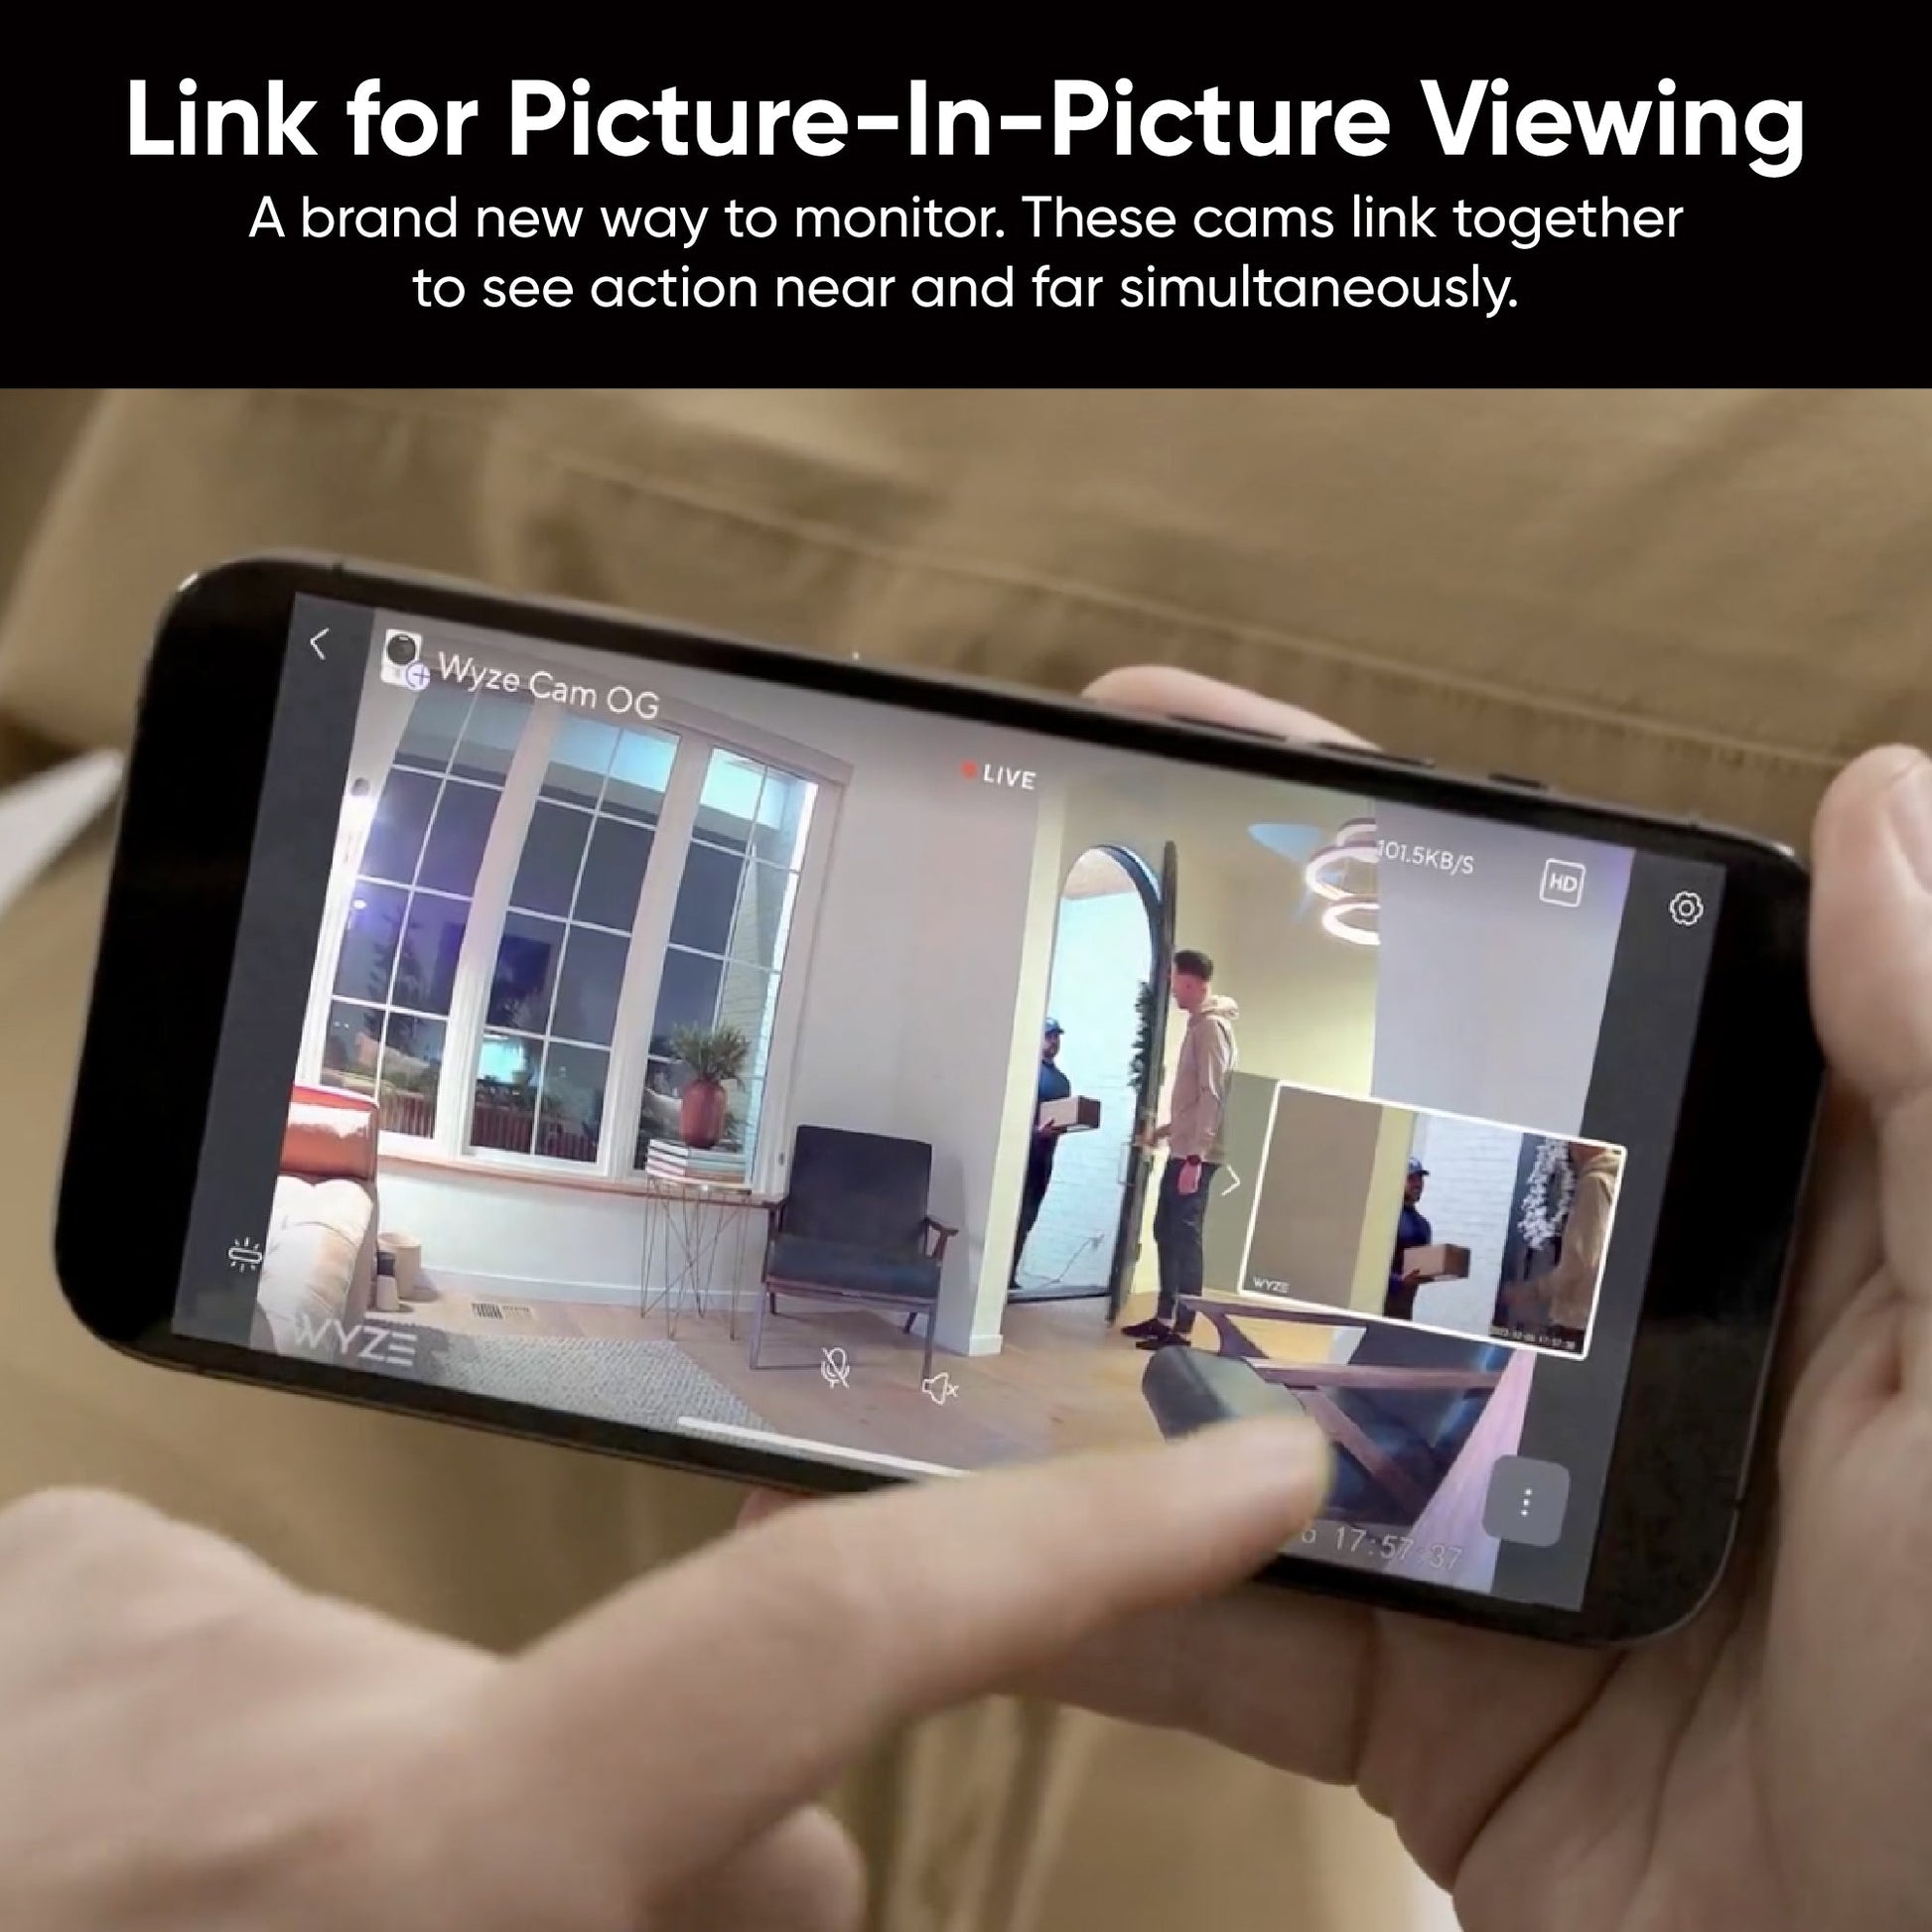 Picture-In-Picture view displayed on a smartphone with the Wyze app. Person's finger is interacting with the app.